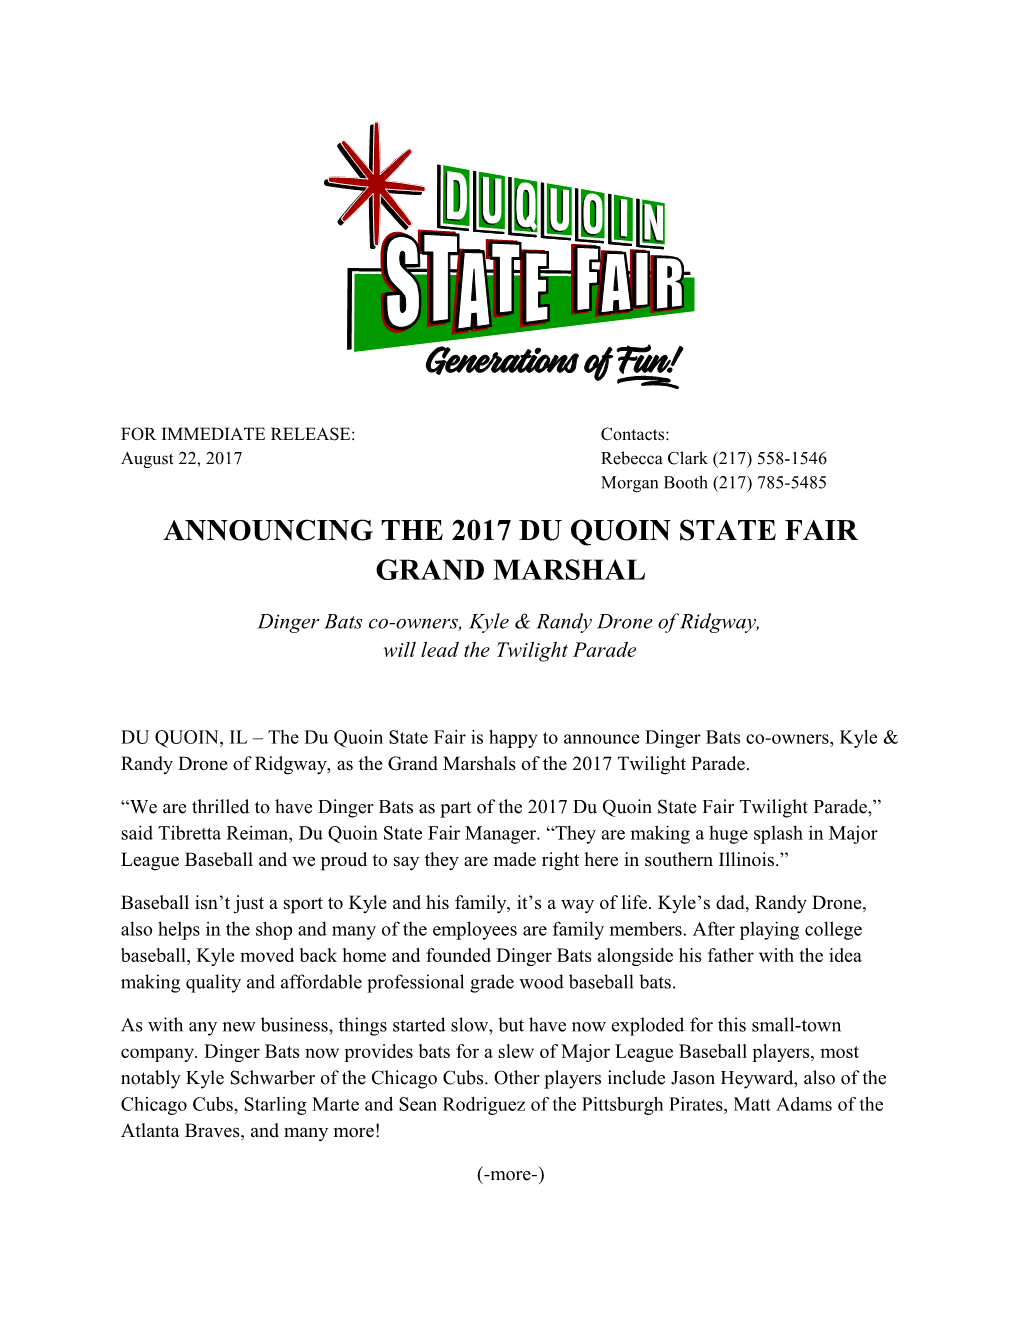 Announcing the 2017 Du Quoin State Fair Grand Marshal